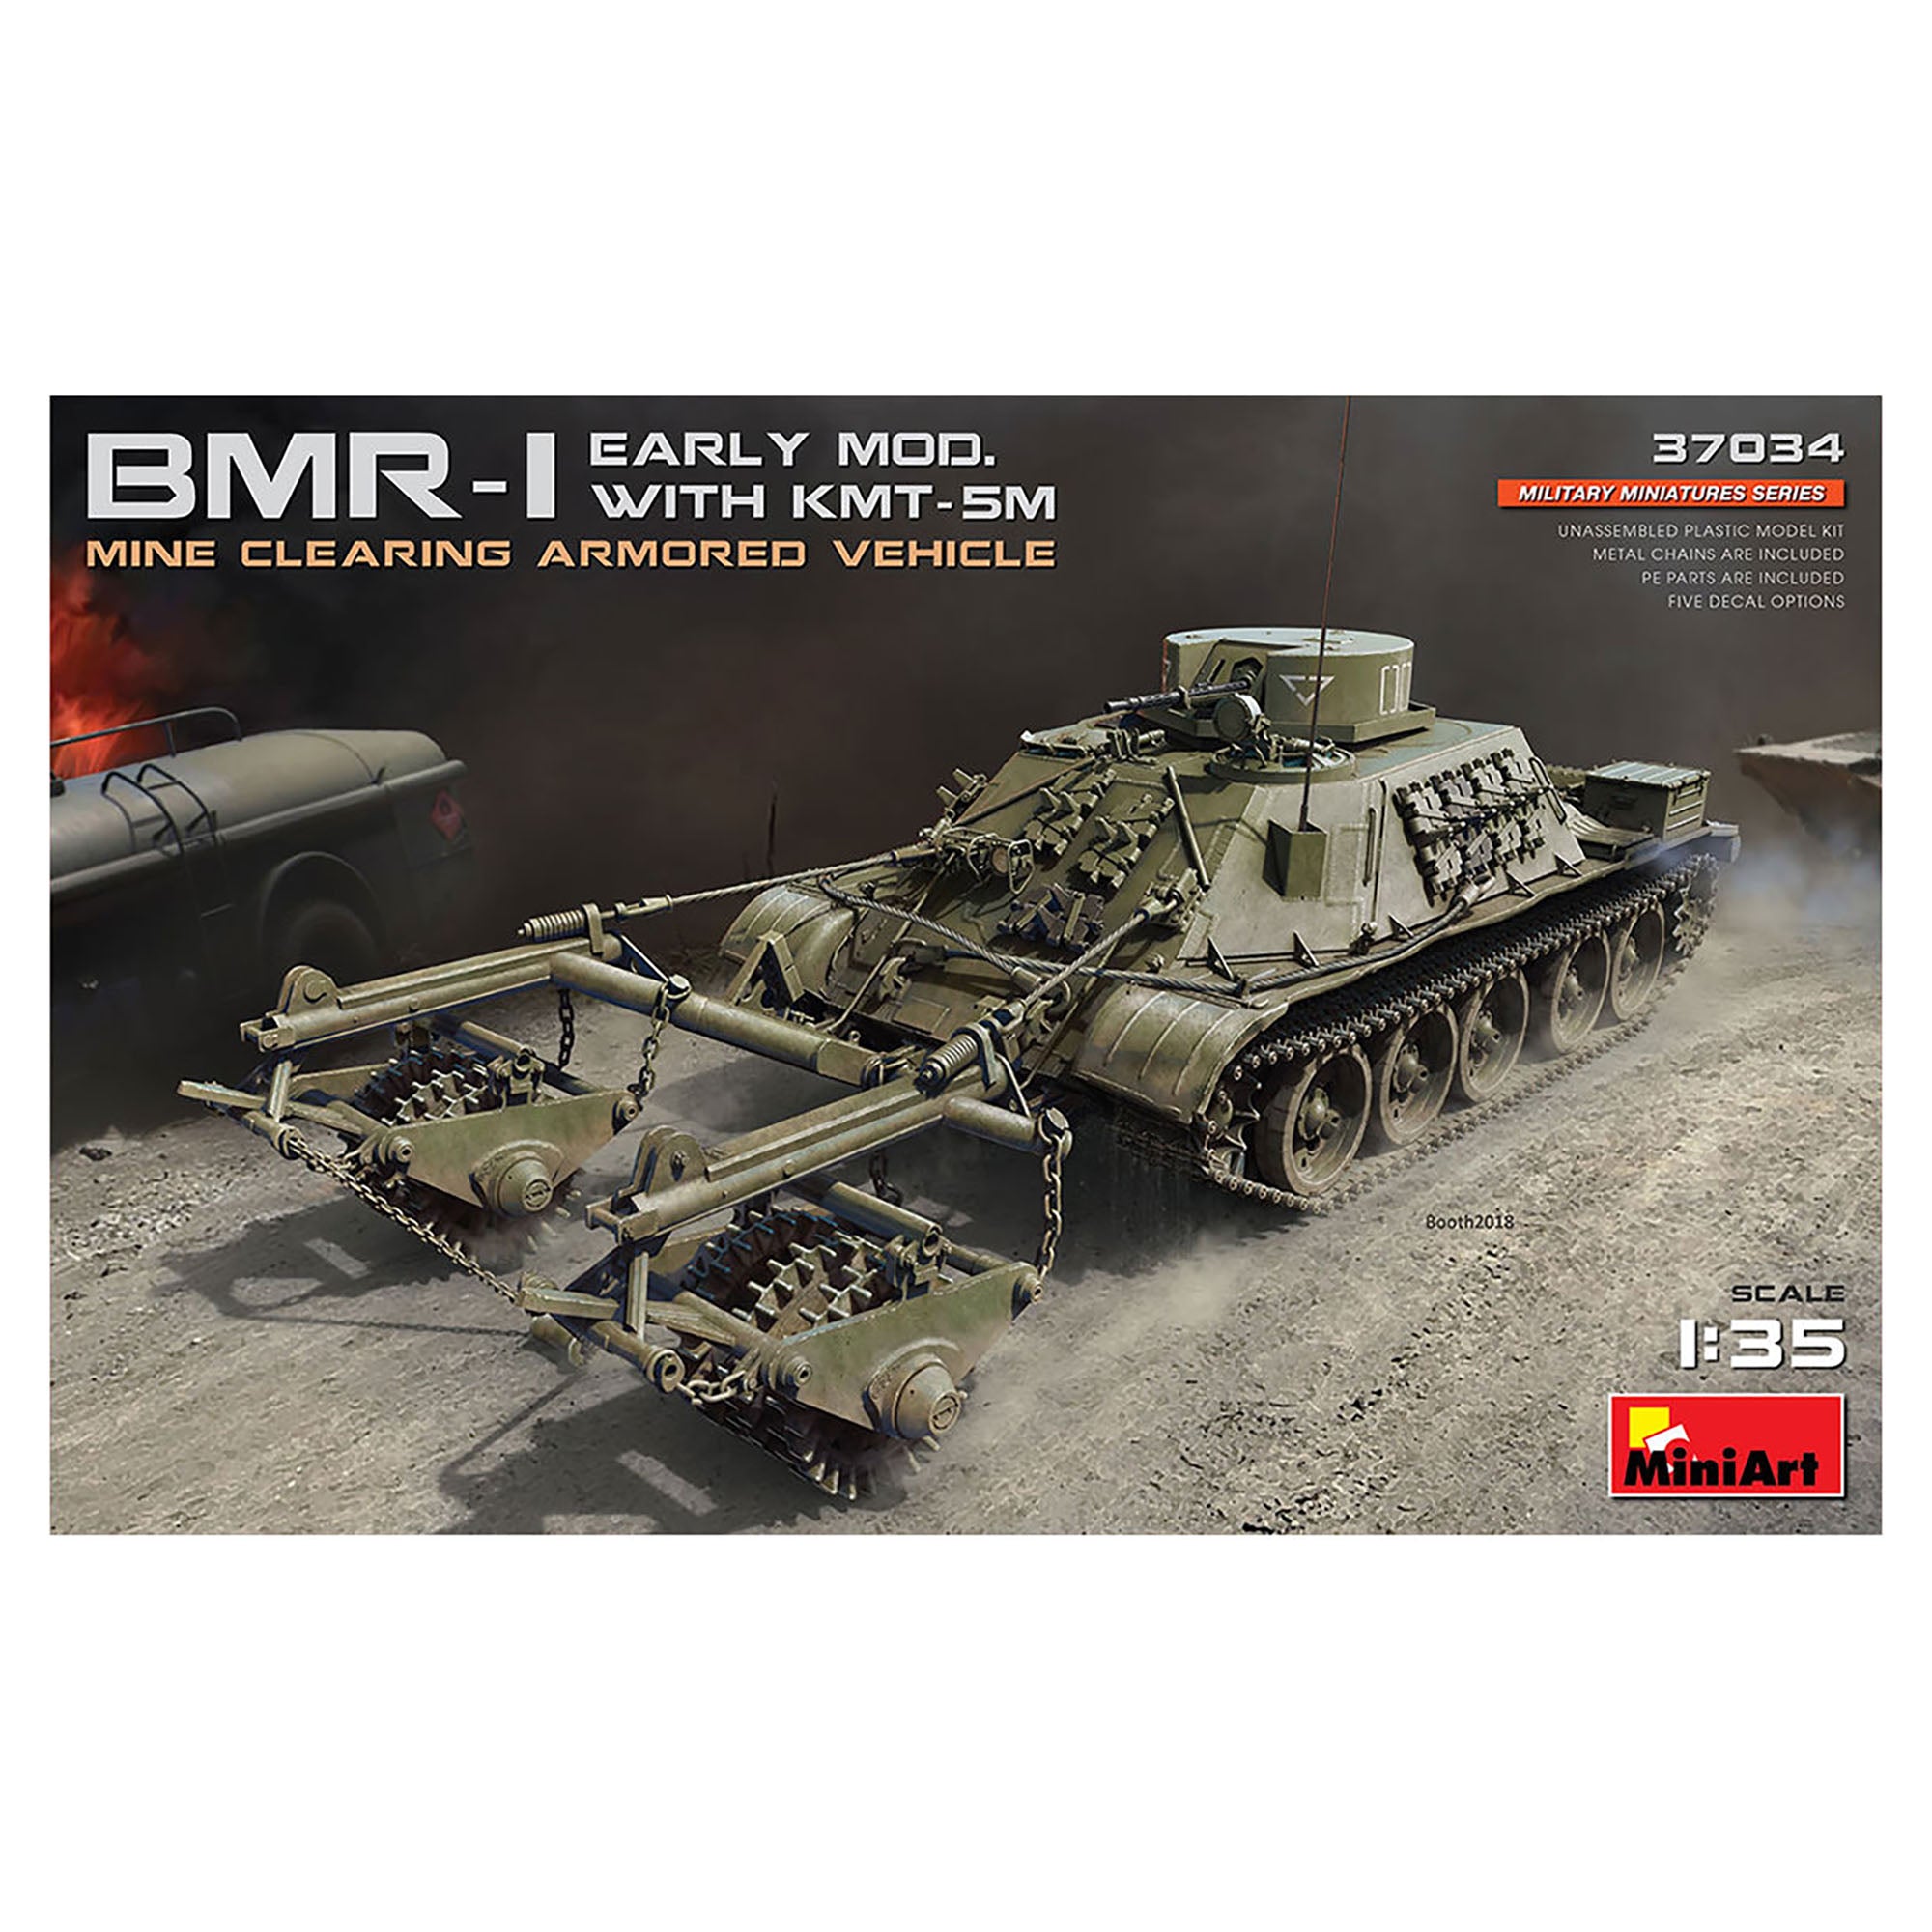 MiniArt 37034 1/35 BMR-1 Early Mod. with KMT-5M Mine Clearing Armoured Vehicle Model Kit